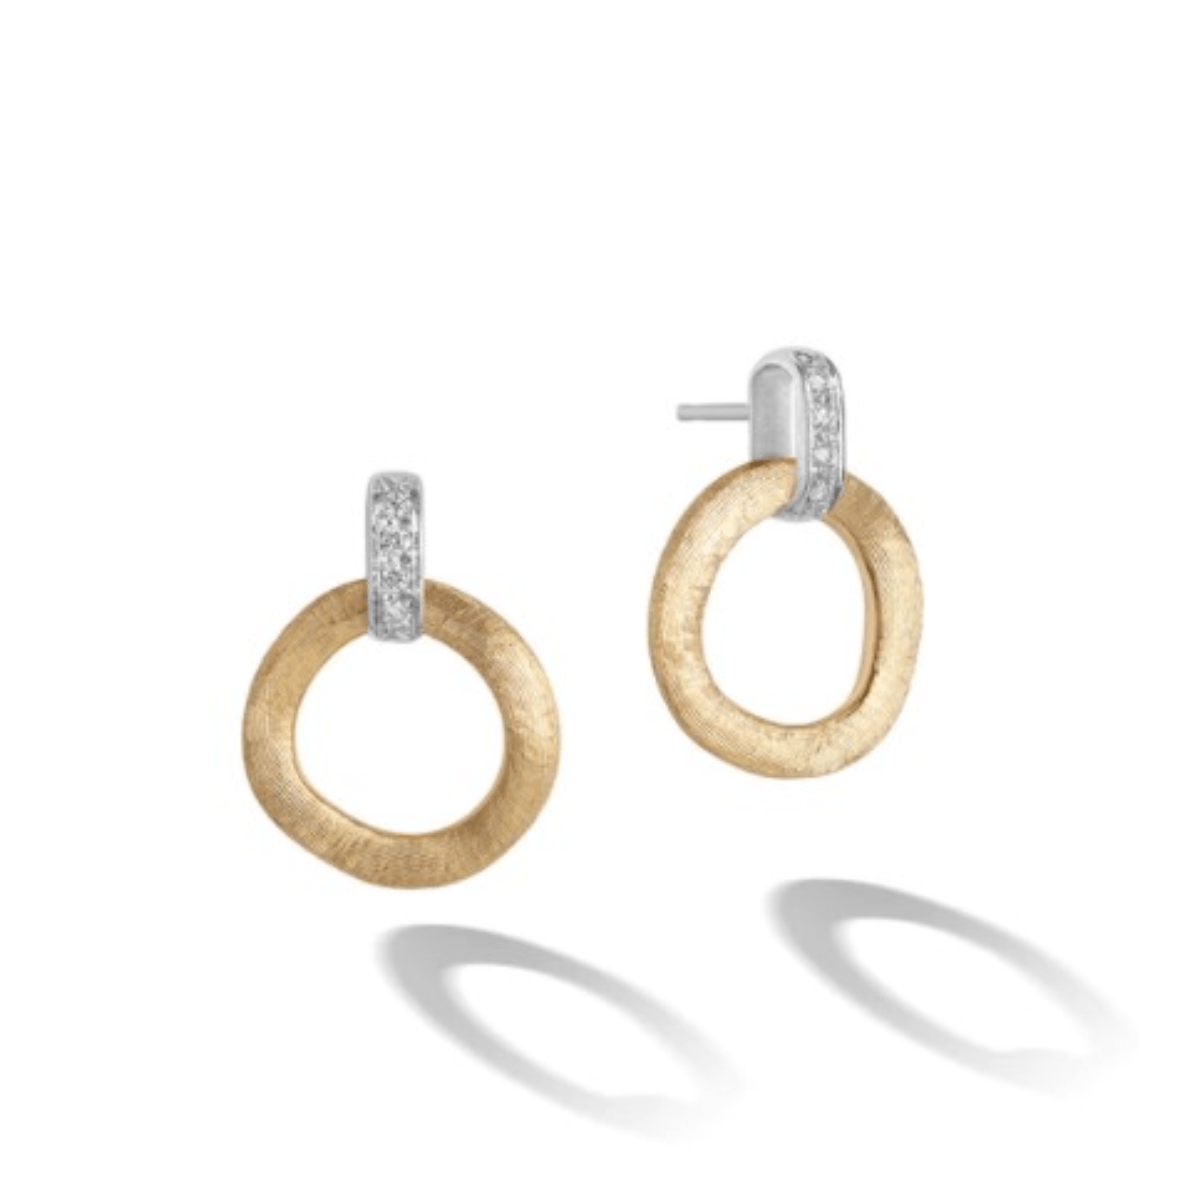 Marco Bicego Jaipur Collection 18K Yellow Gold Stud Drop Earrings with Diamonds 0